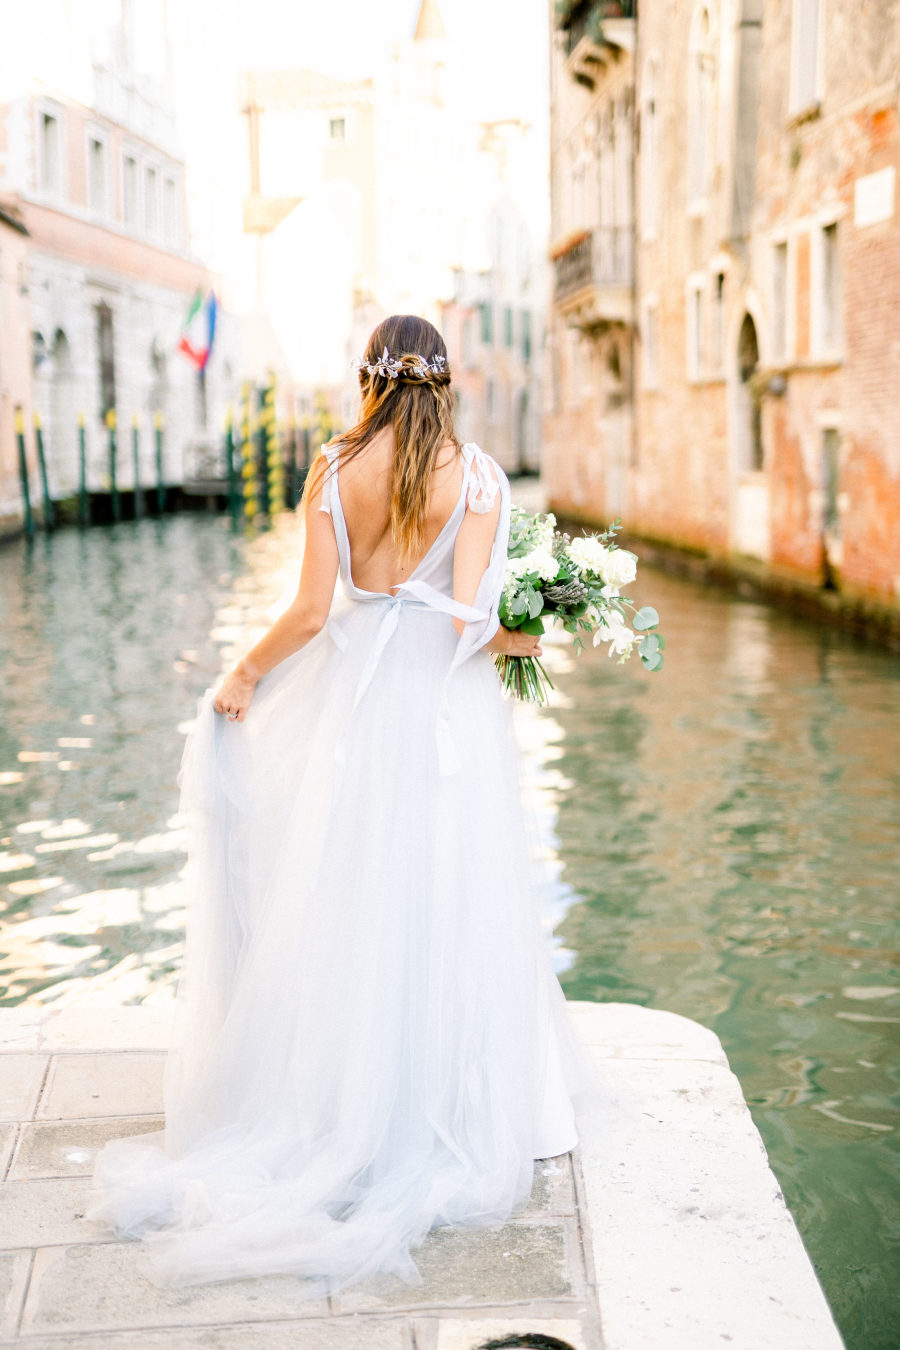 This wedding shoot took place in Venice and was done with a subtle and tender color palette unlike usual Venice weddings in jewel tones